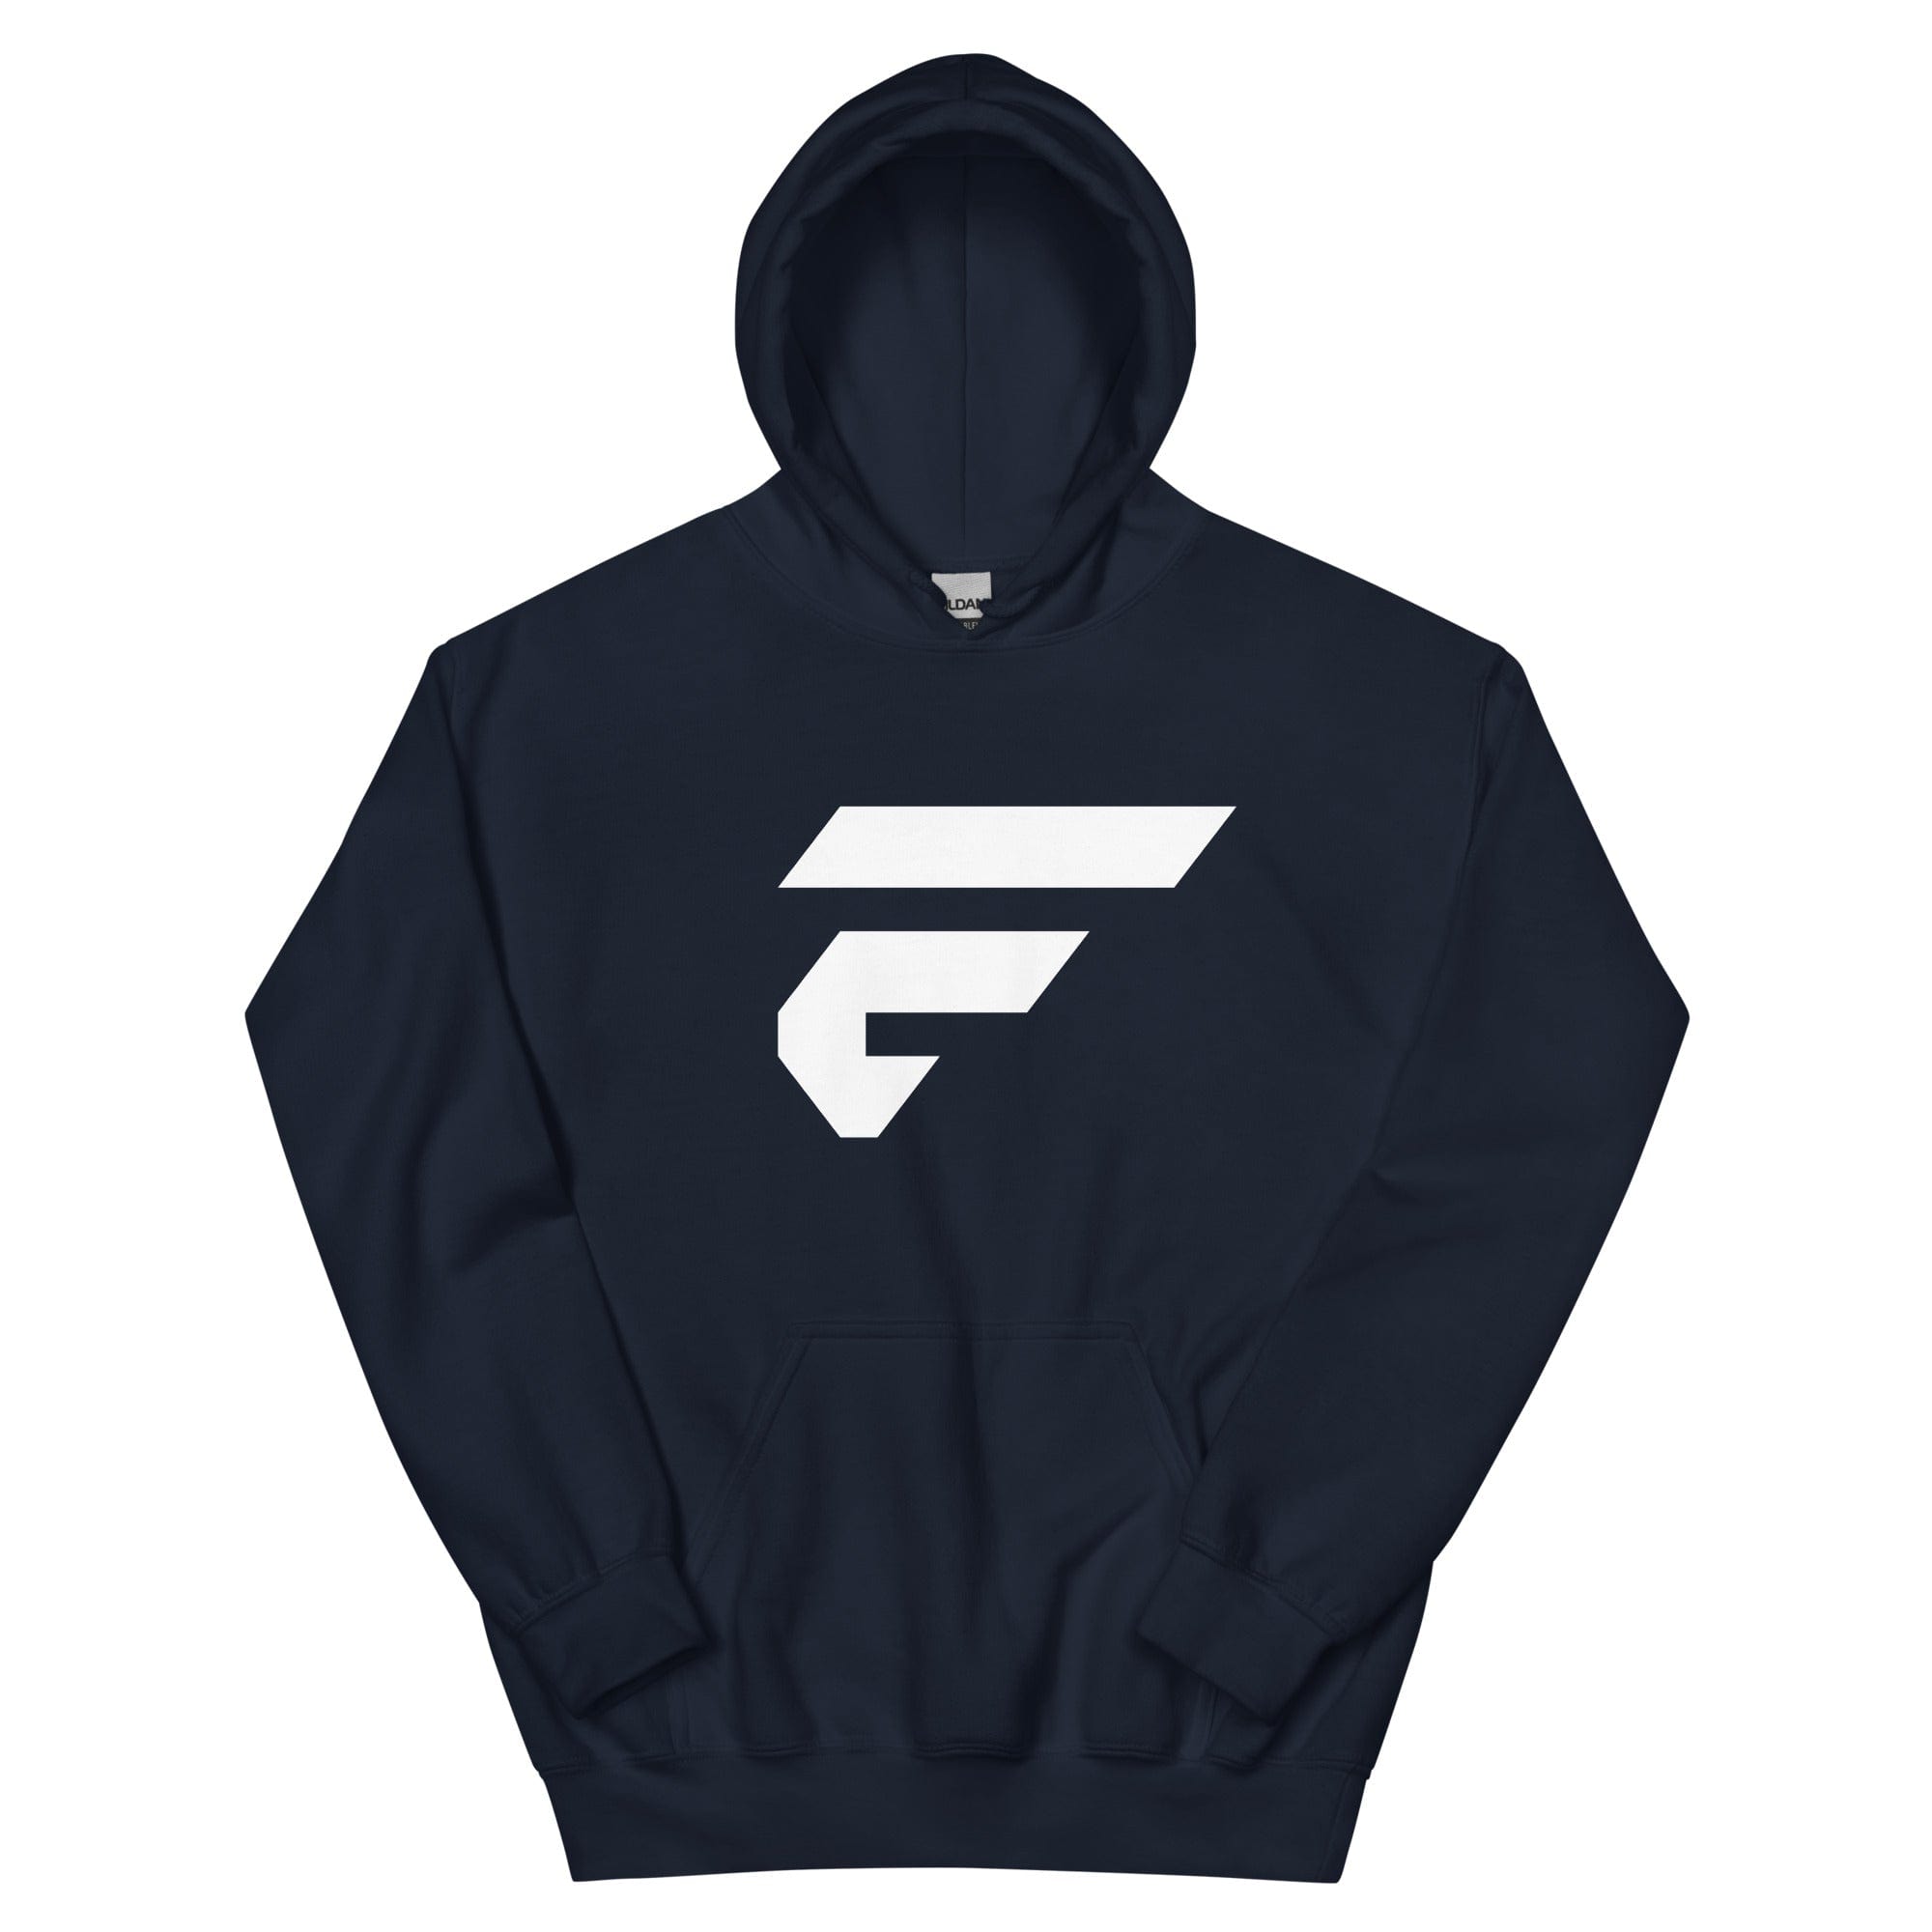 Navy unisex cotton hoodie with Fire Cornhole F logo in white